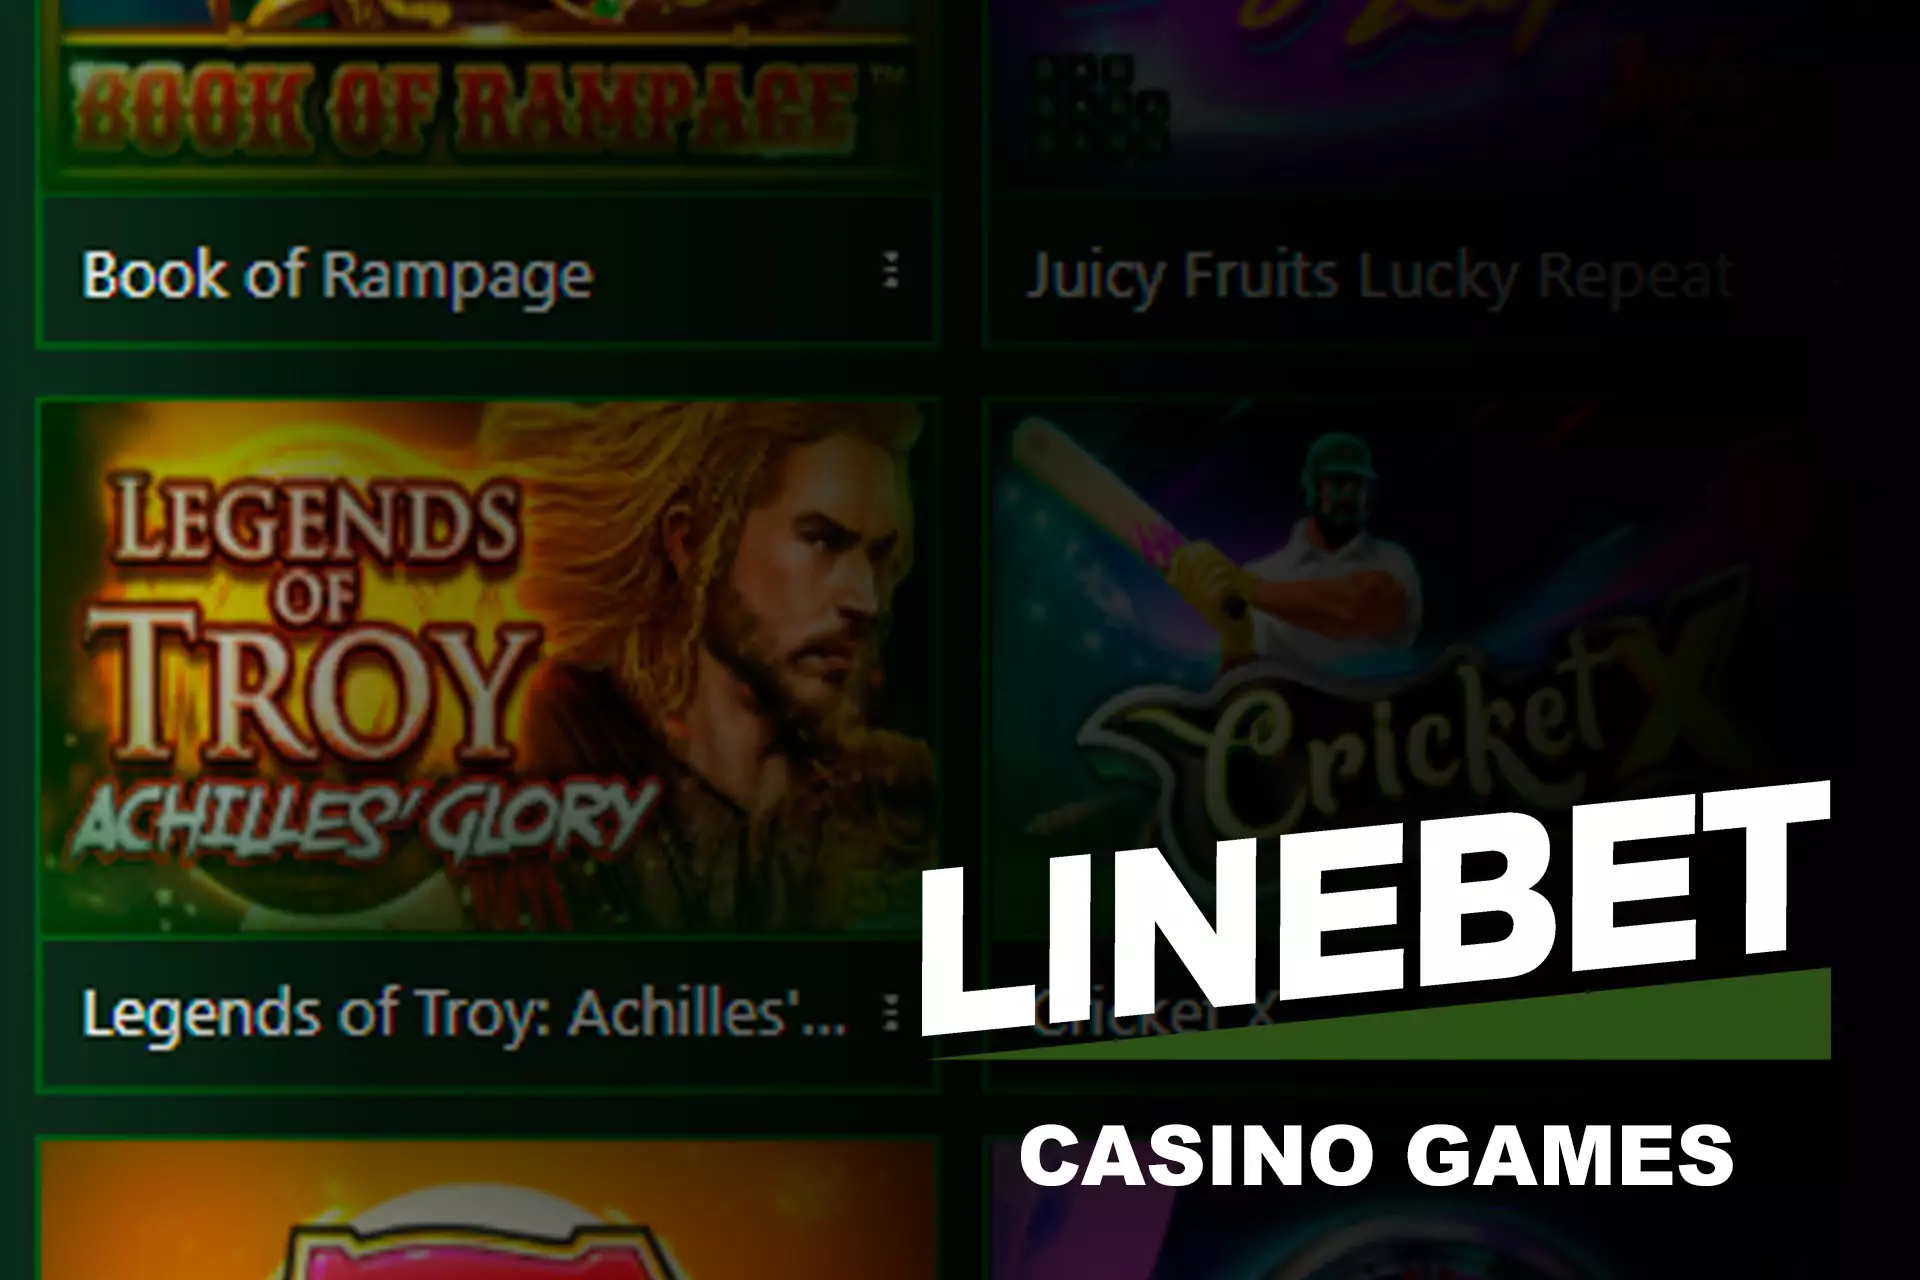 In the casino, you can play lots of games from slots to TV games.